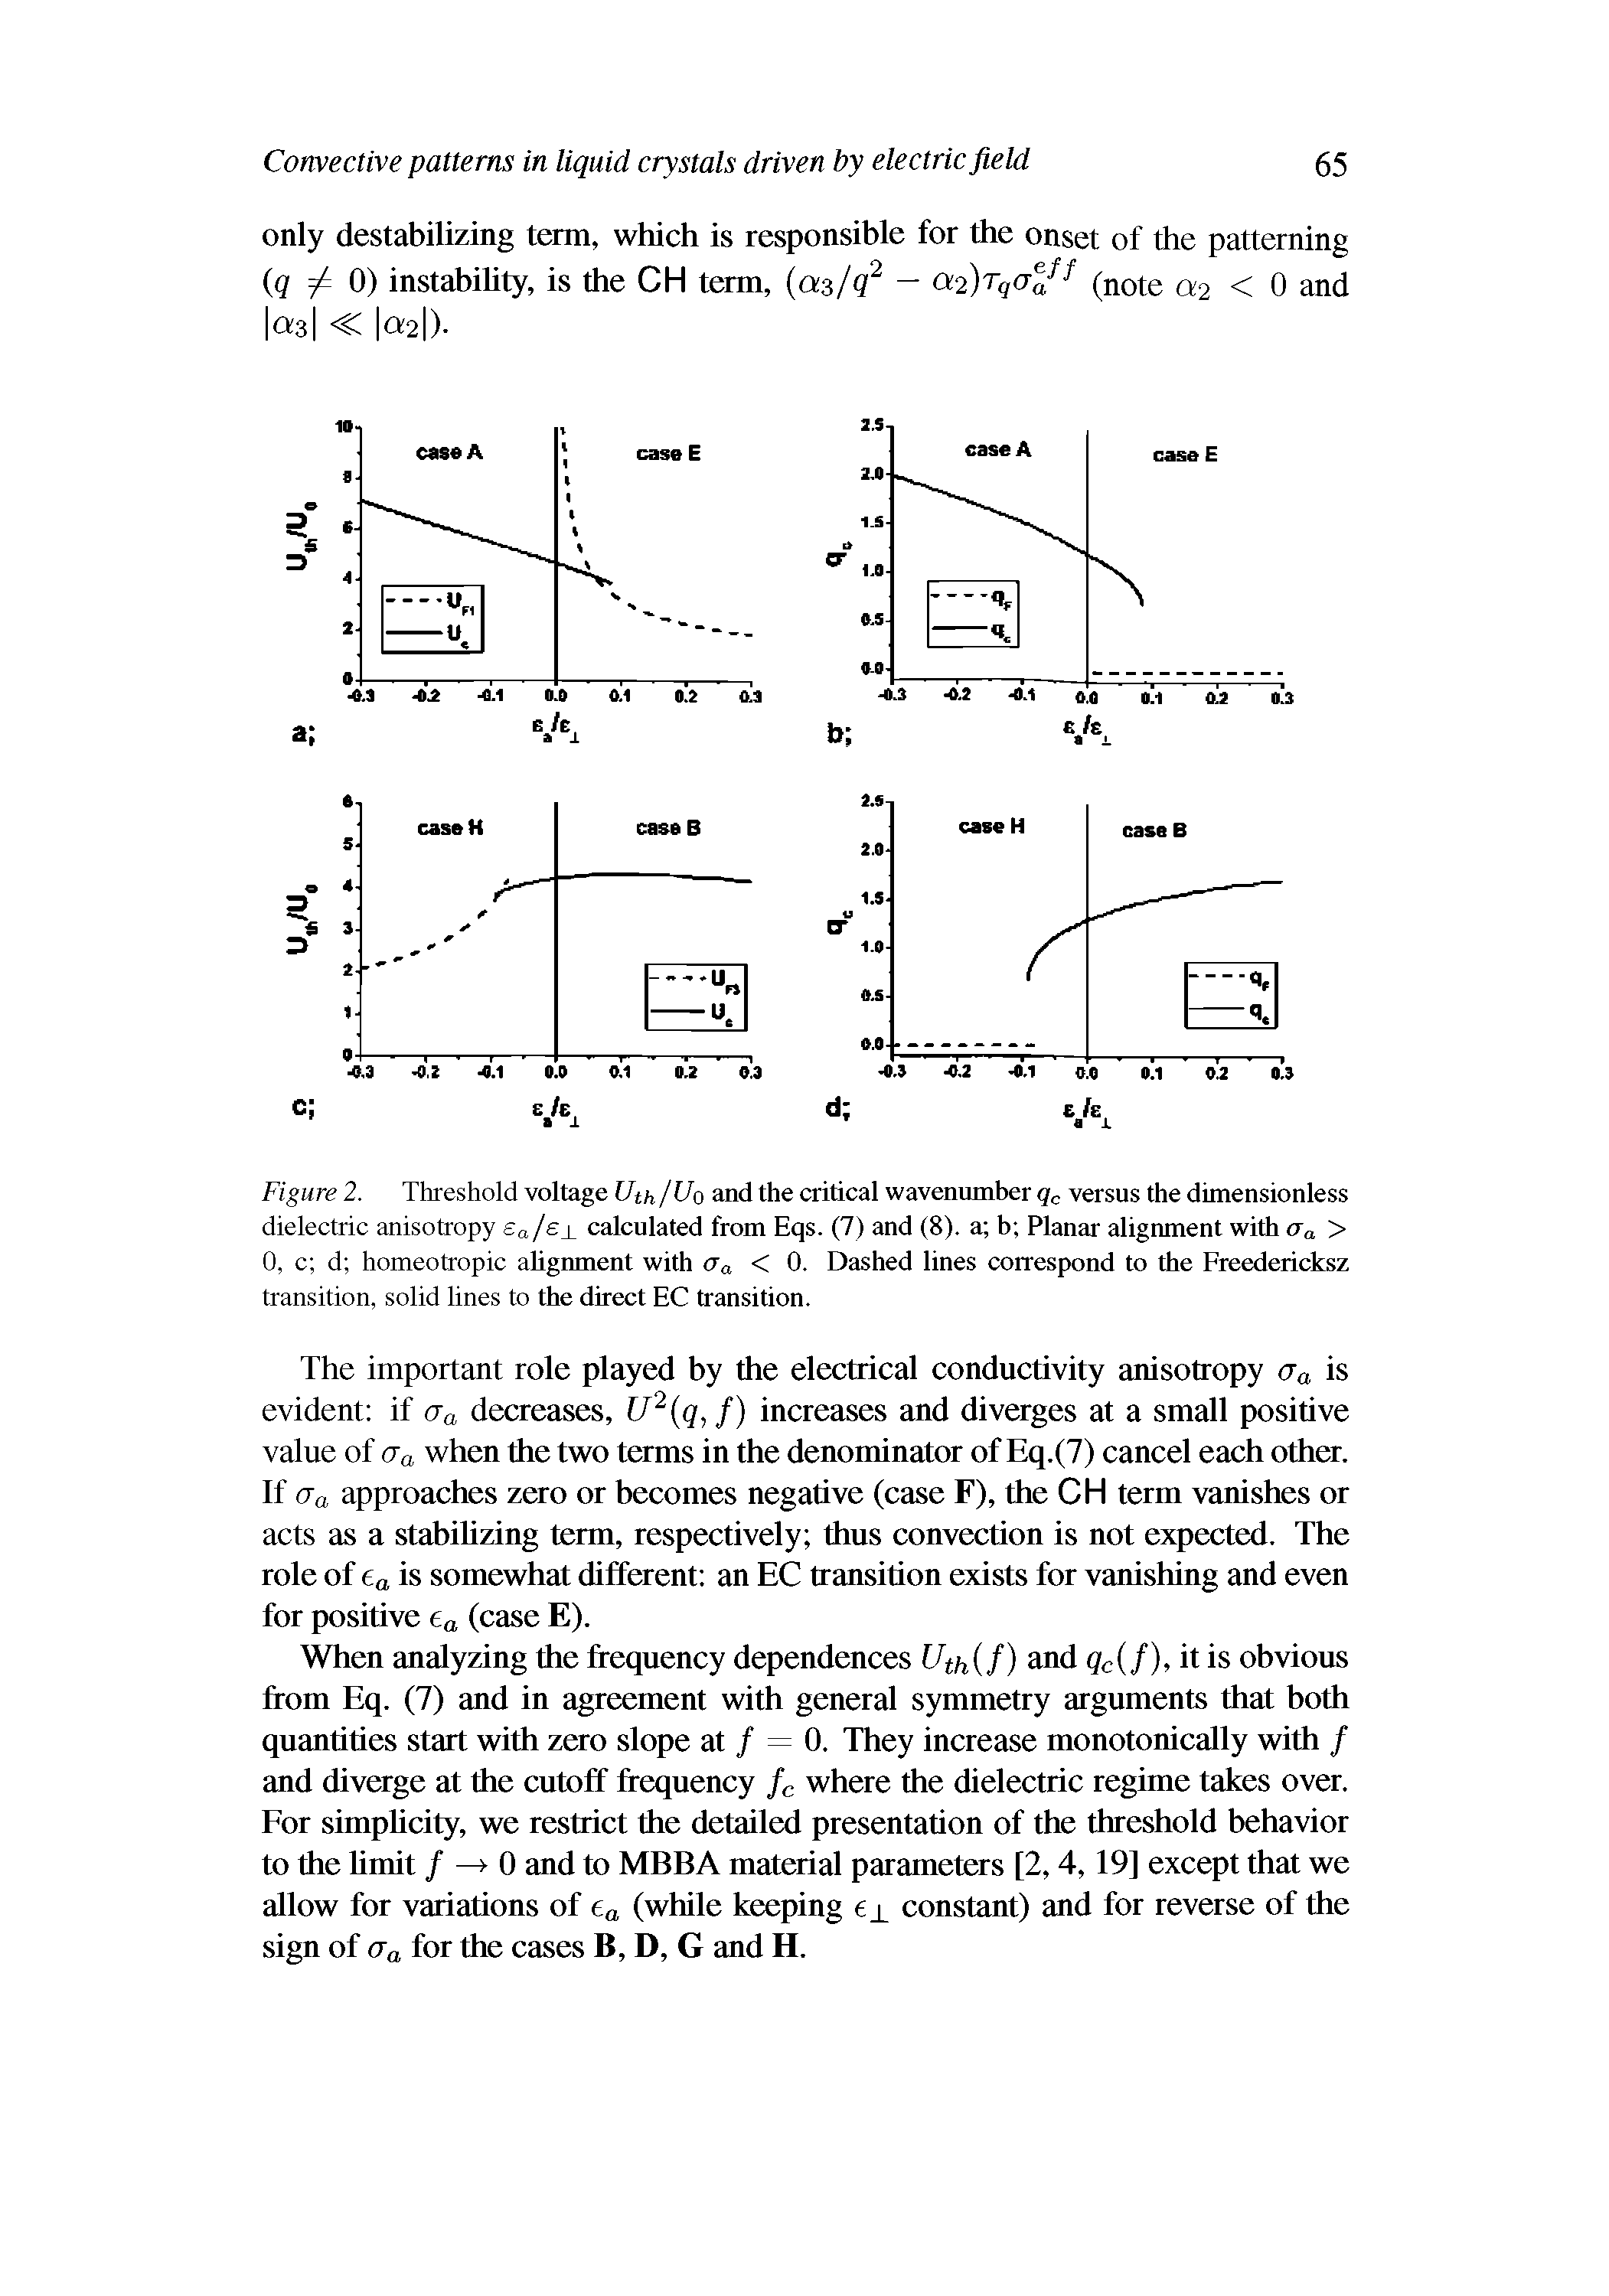 Figure 2. Threshold voltage Uth/Uo and the critical wavenumber qc versus the dimensionless dielectric anisotropy eajev calculated from Eqs. (7) and (8). a b Planar alignment with a a > 0, c d homeotropic ahgnment with a a < 0. Dashed lines correspond to the Freedericksz transition, solid lines to the direct EC transition.